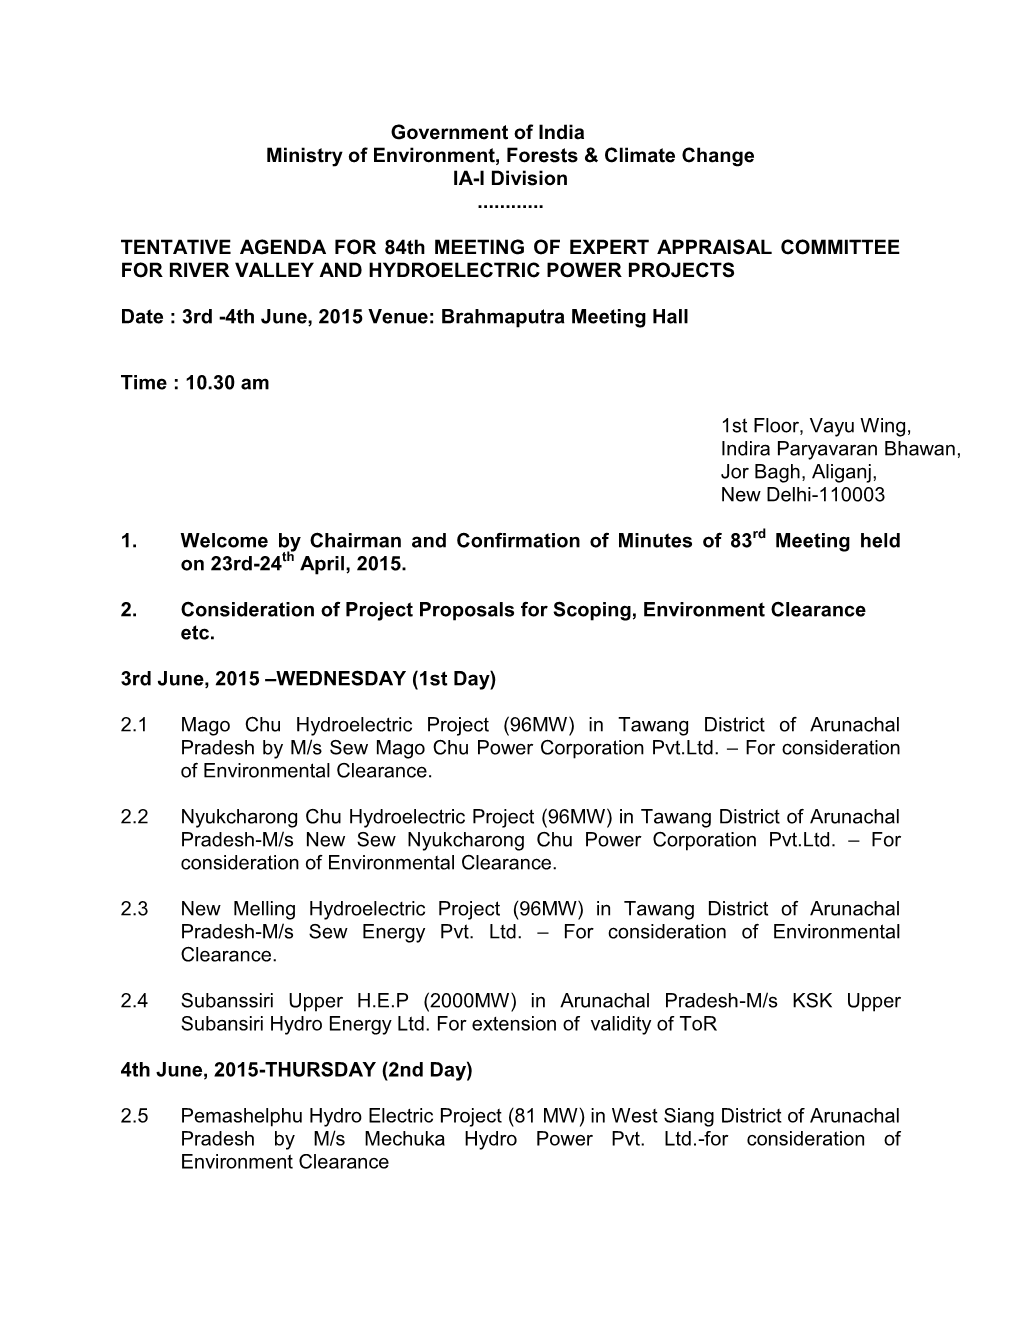 Government of India Ministry of Environment, Forests & Climate